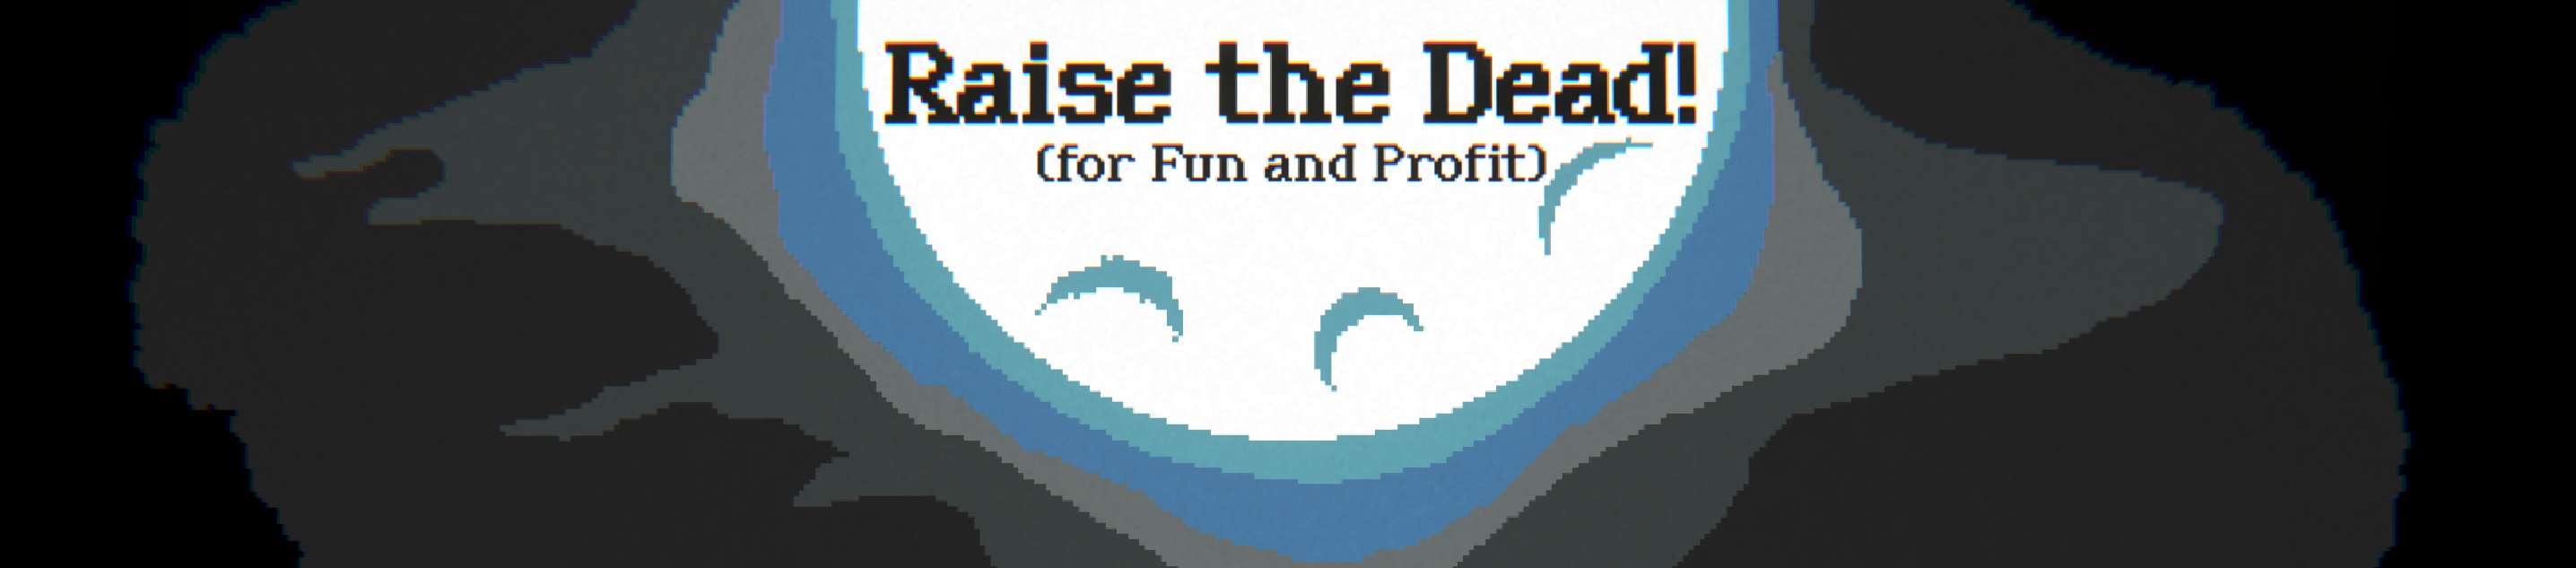 Raise the Dead for Fun and Profit